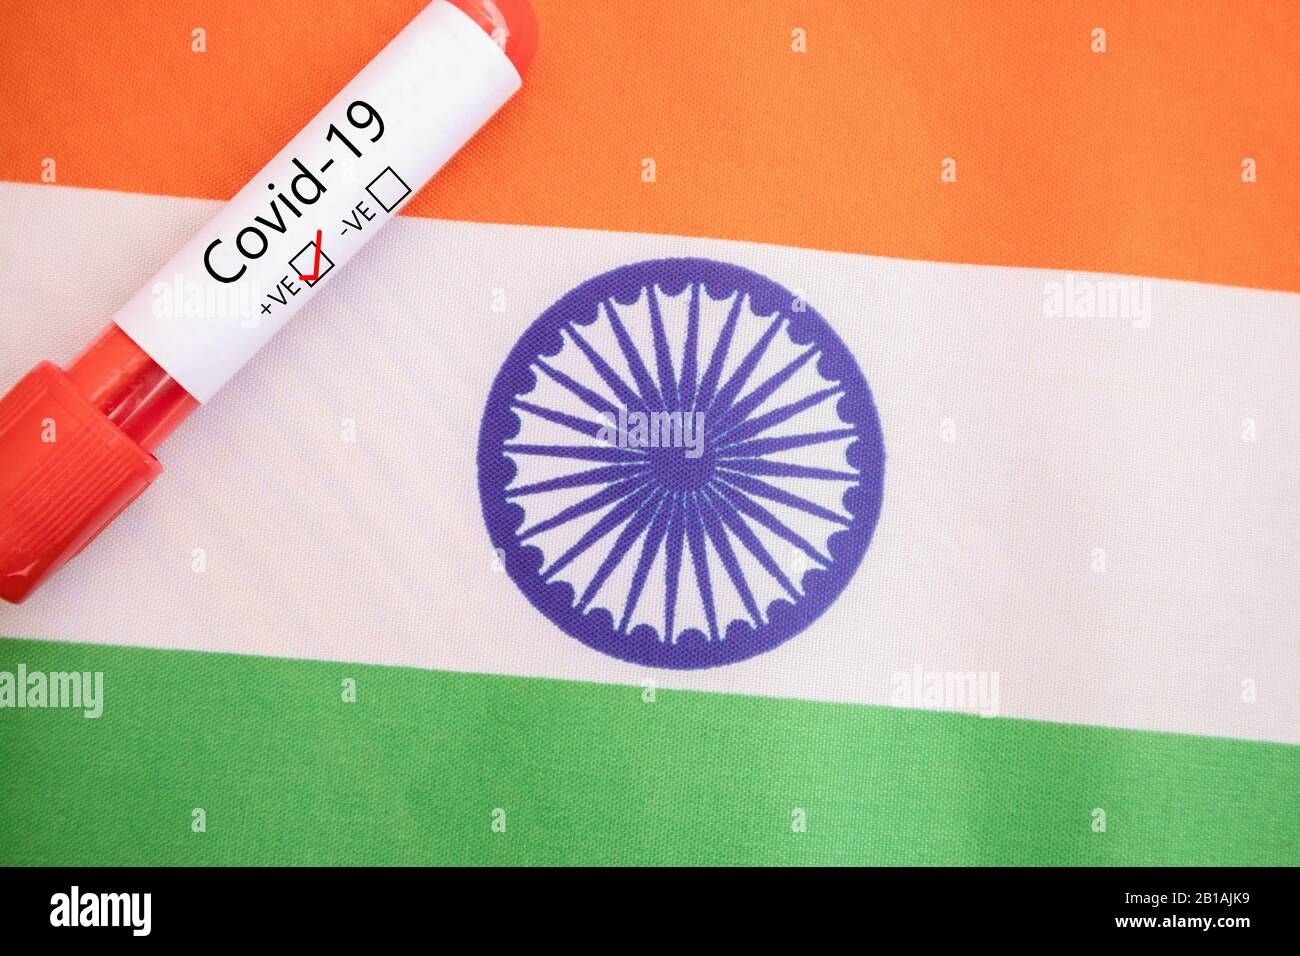 Concept of Covid-19, Coronavirus or nCov 2019 positive test at India showing with blood sample and flag. Stock Photo